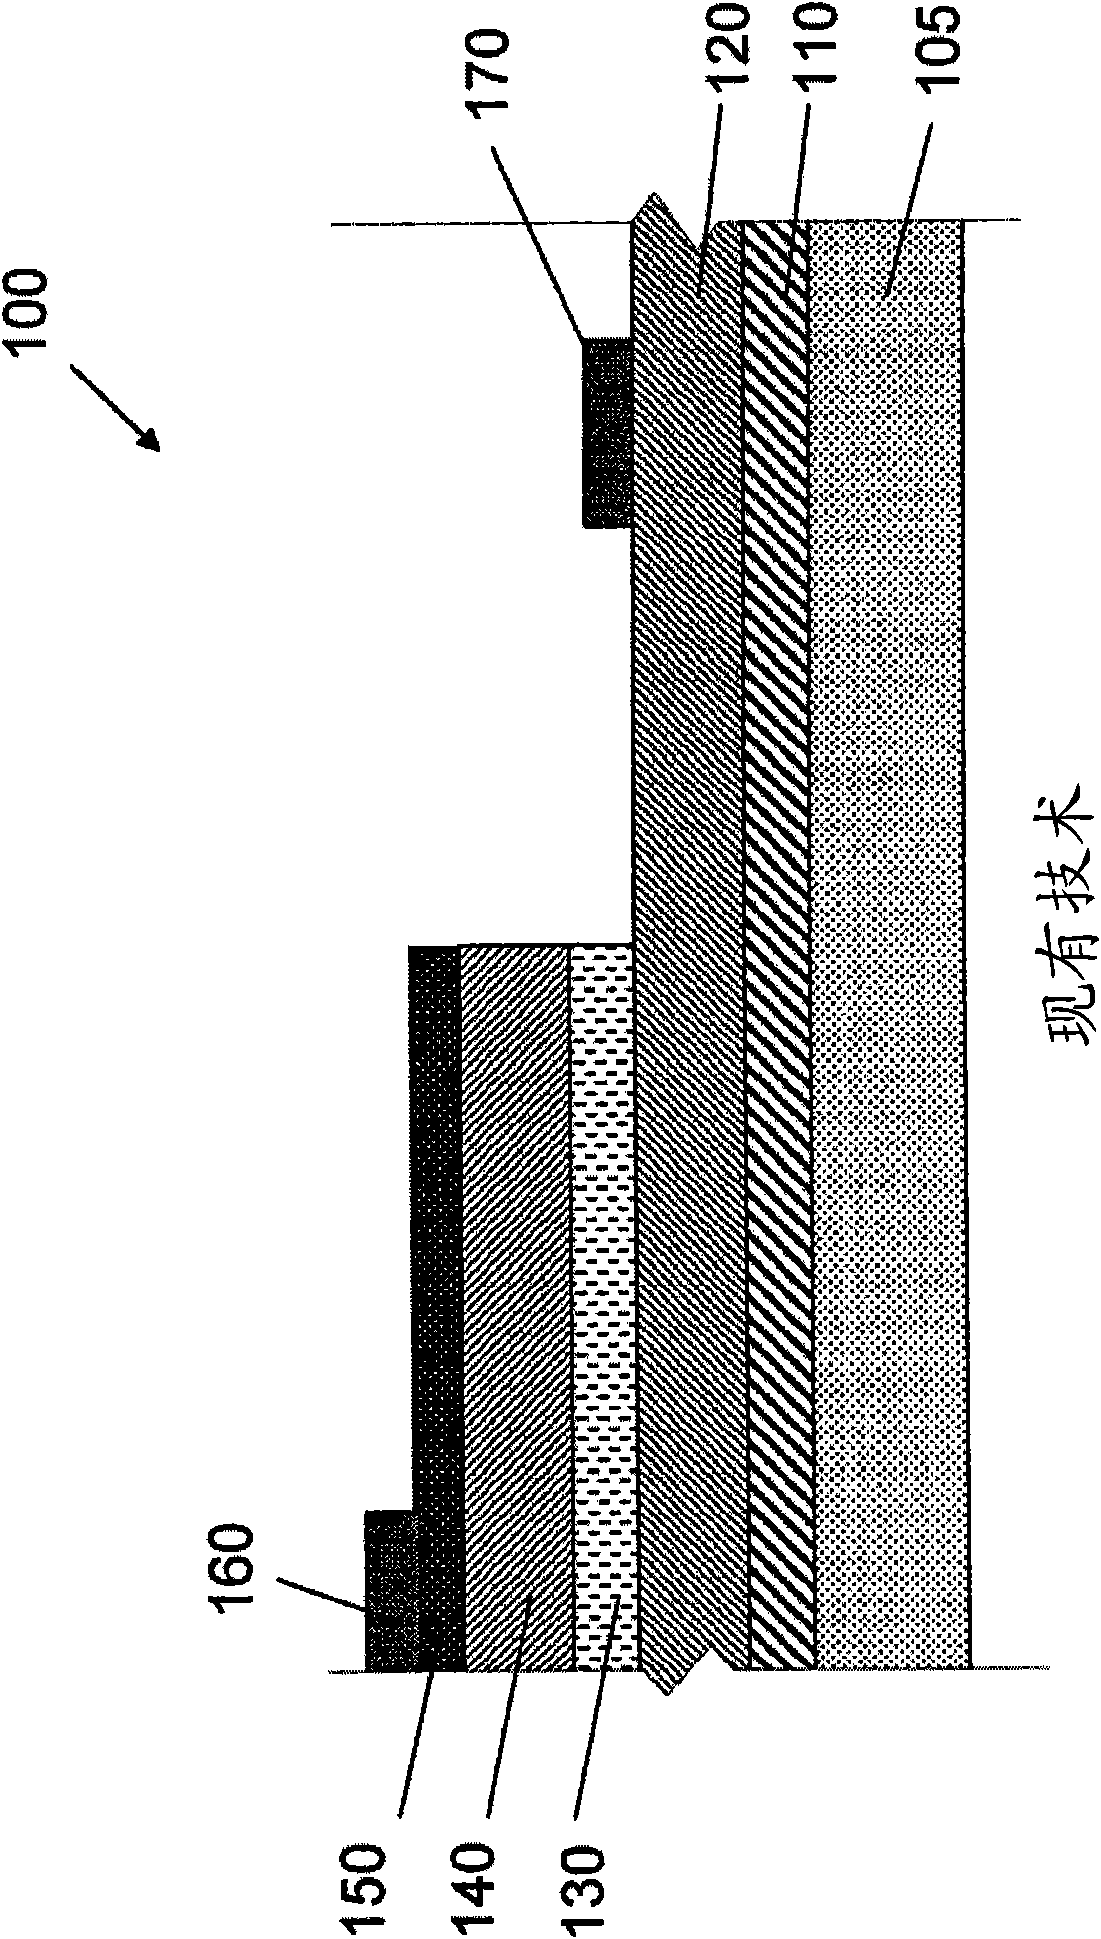 SILICON BASED SOLID STATE LIGHTING and manufacturing method thereof